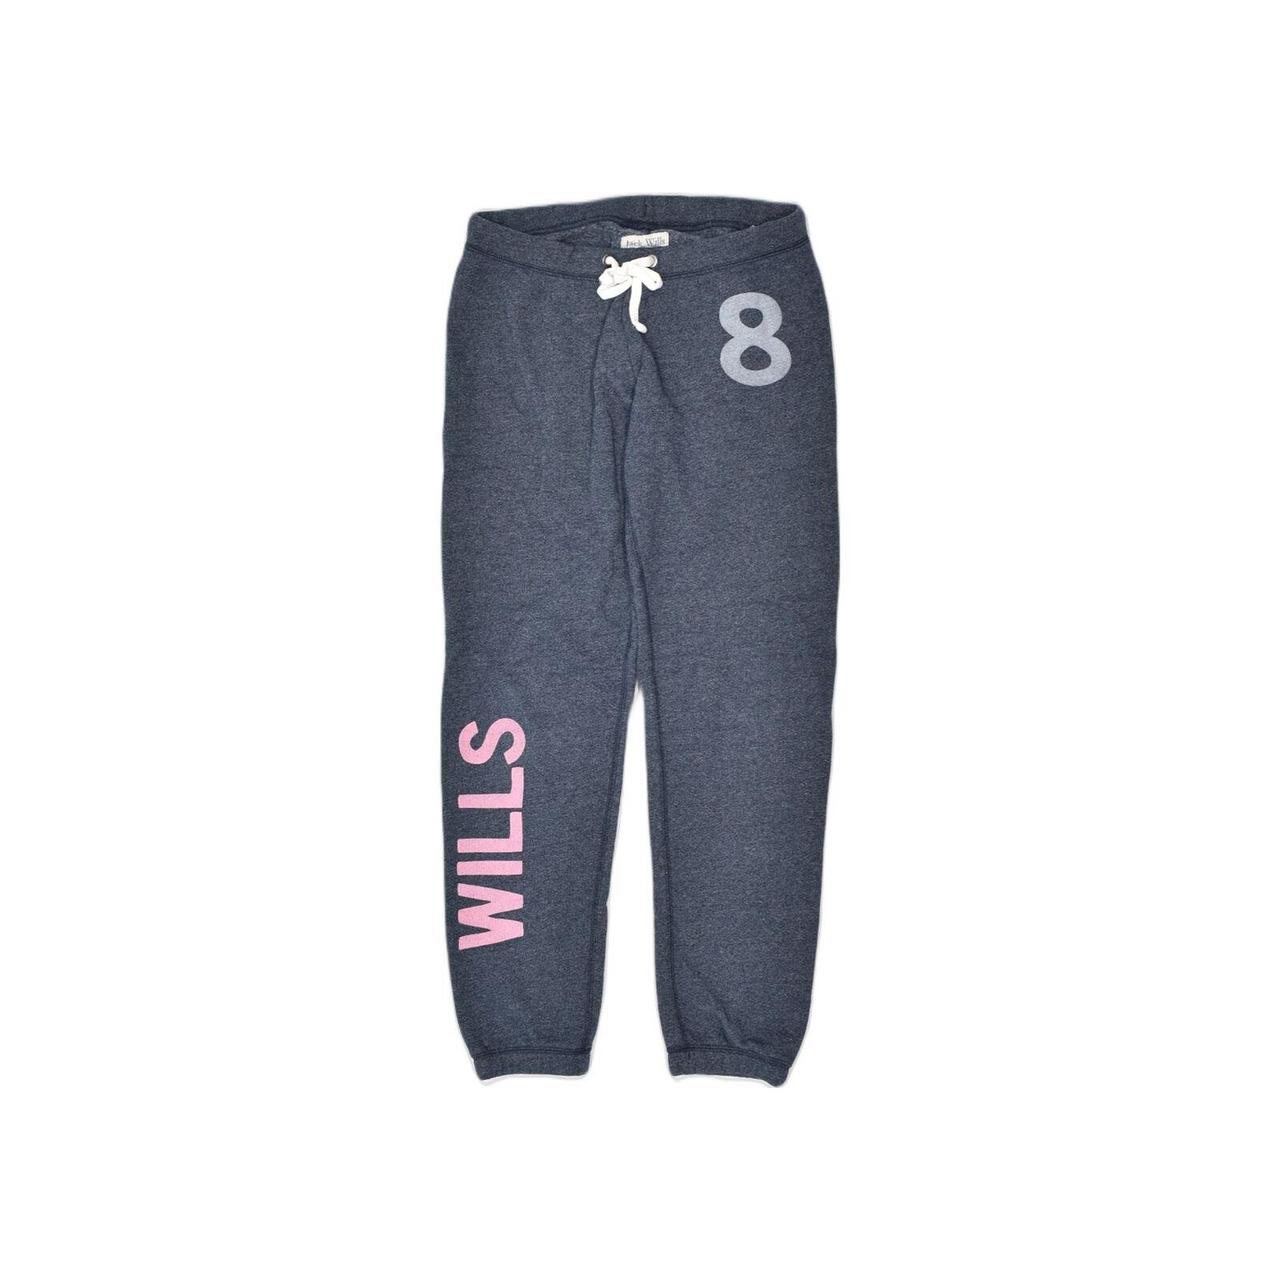 Trousers Jack Wills  UK 12 buy preowned at 40 EUR